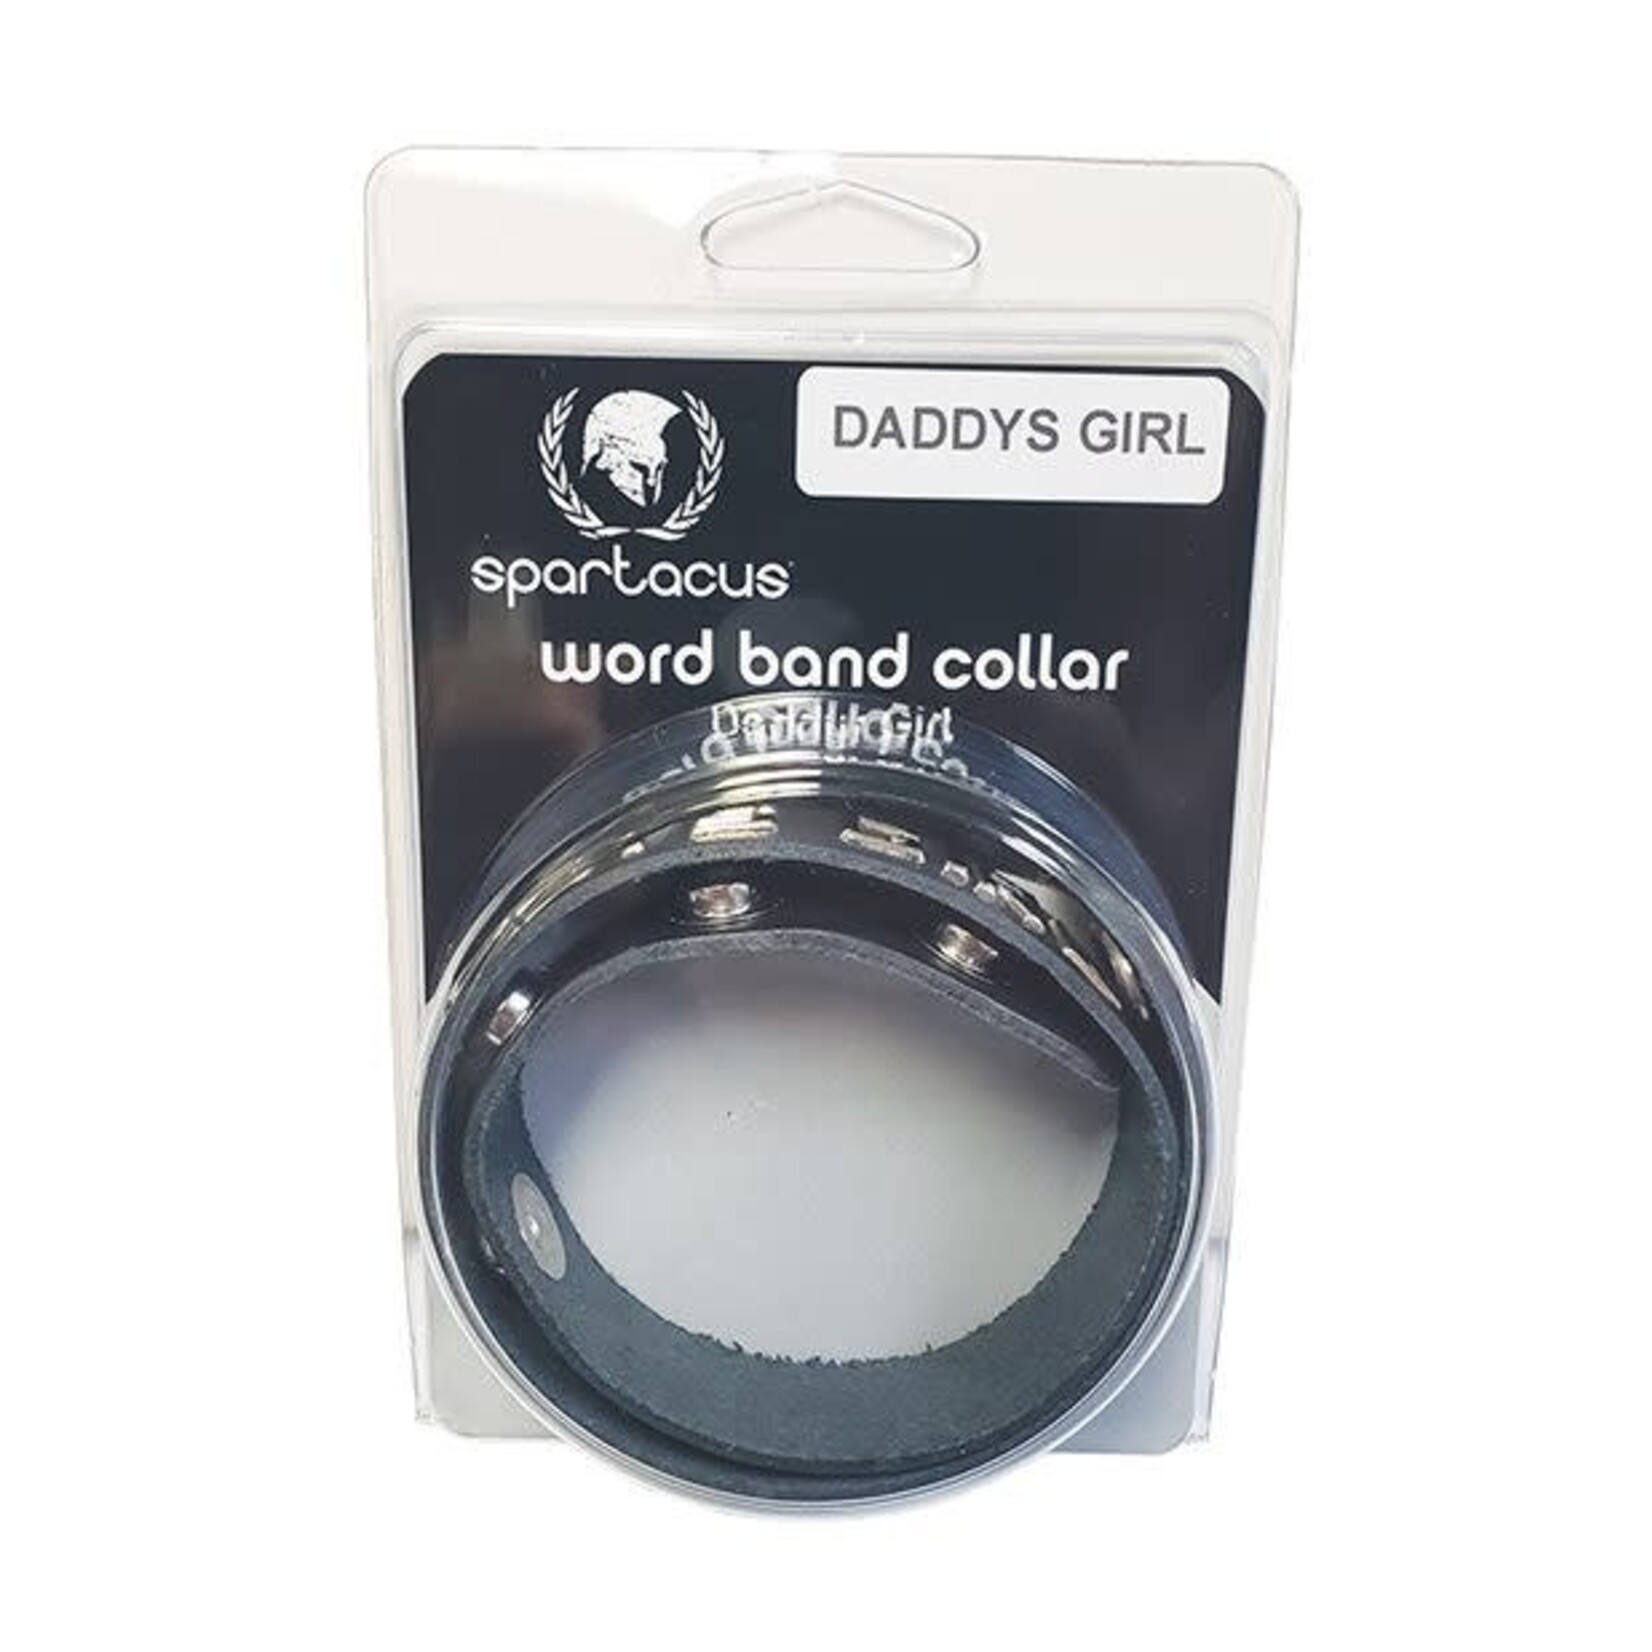 DADDY'S GIRL LEATHER WORD BAND COLLAR